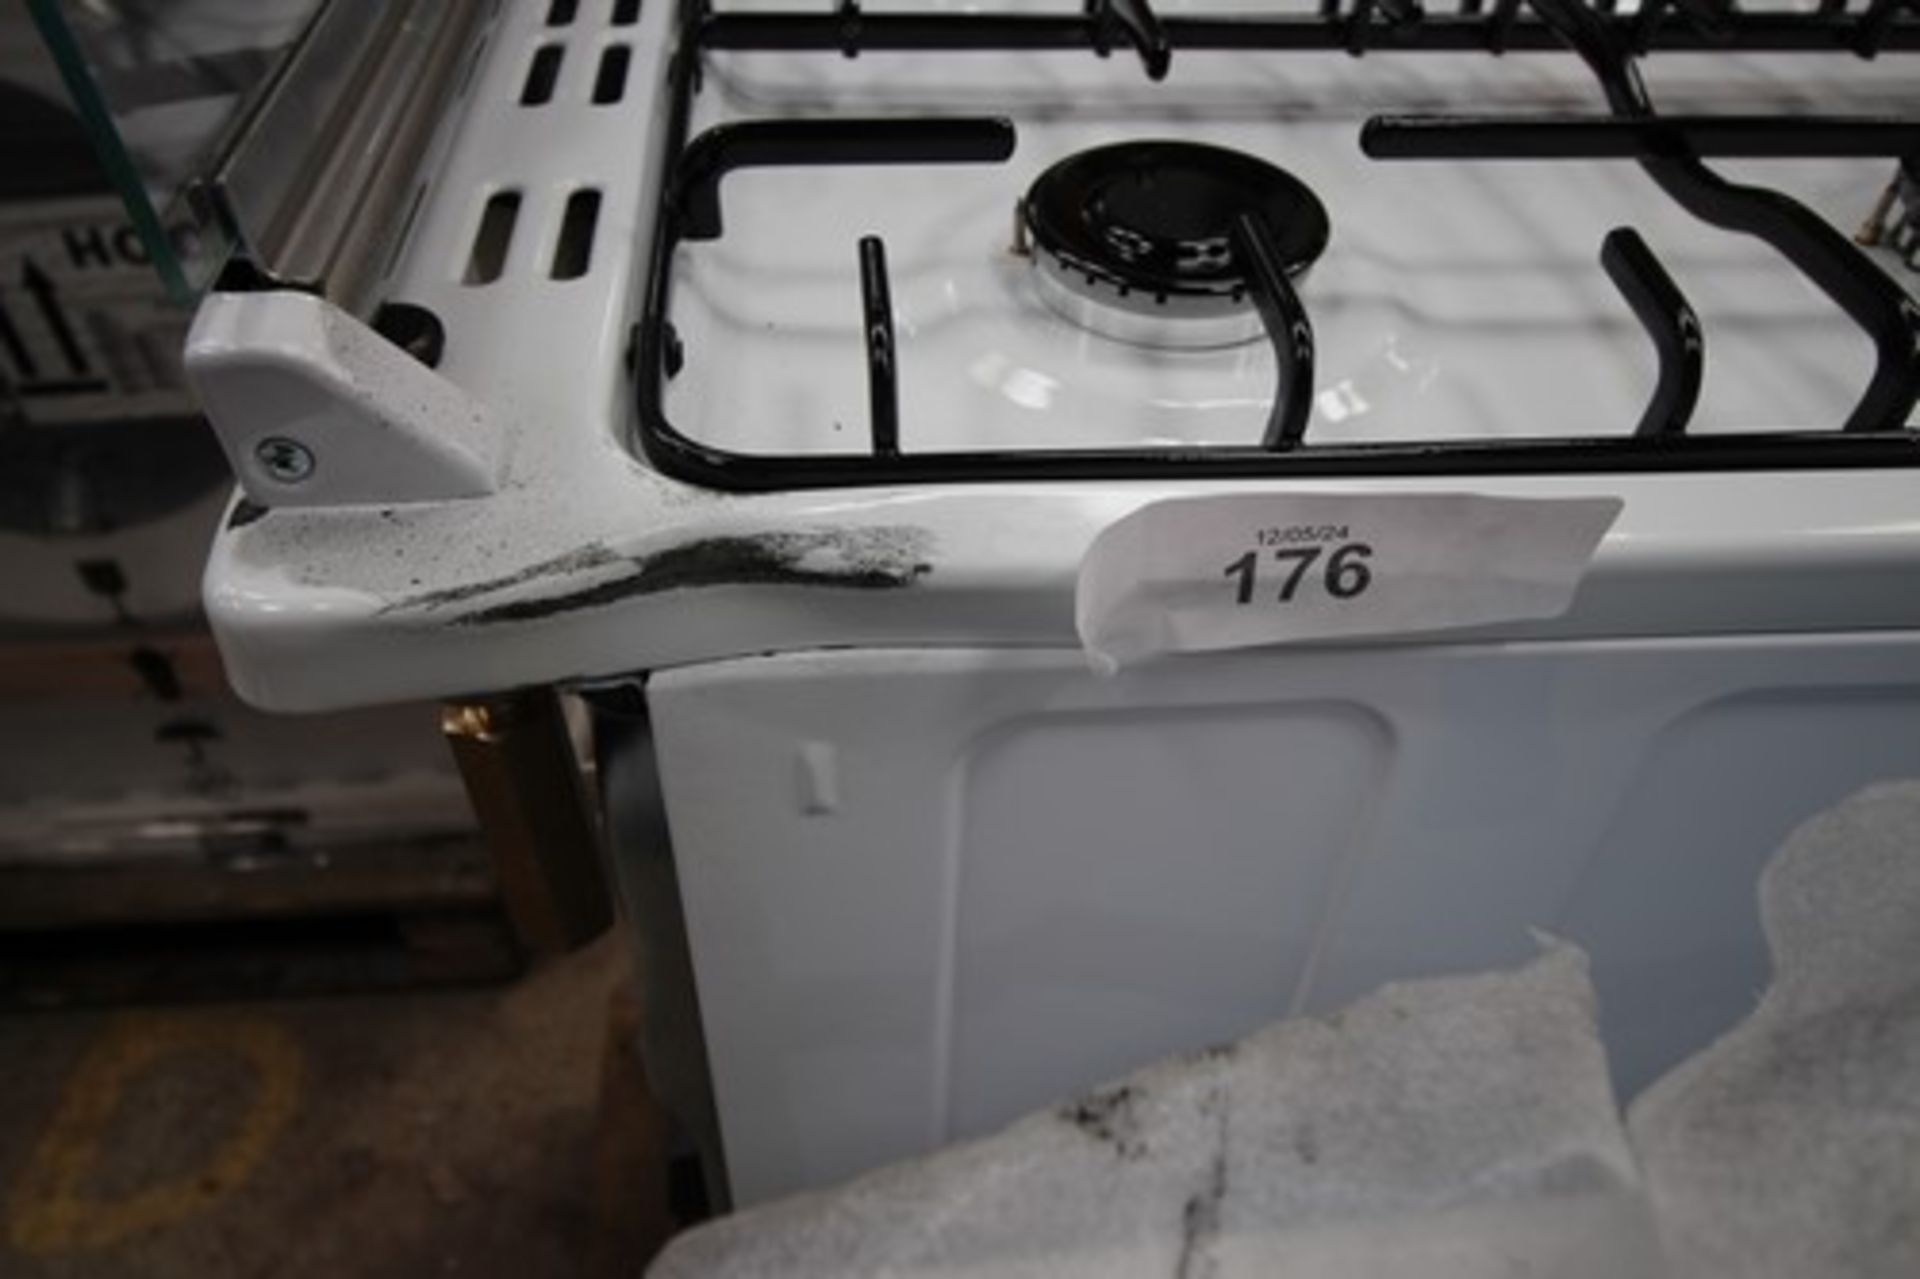 1 x Beko gas double oven and hob, Model EDG507W, dented top panel (RHS), paint scratches on sides - Image 3 of 5